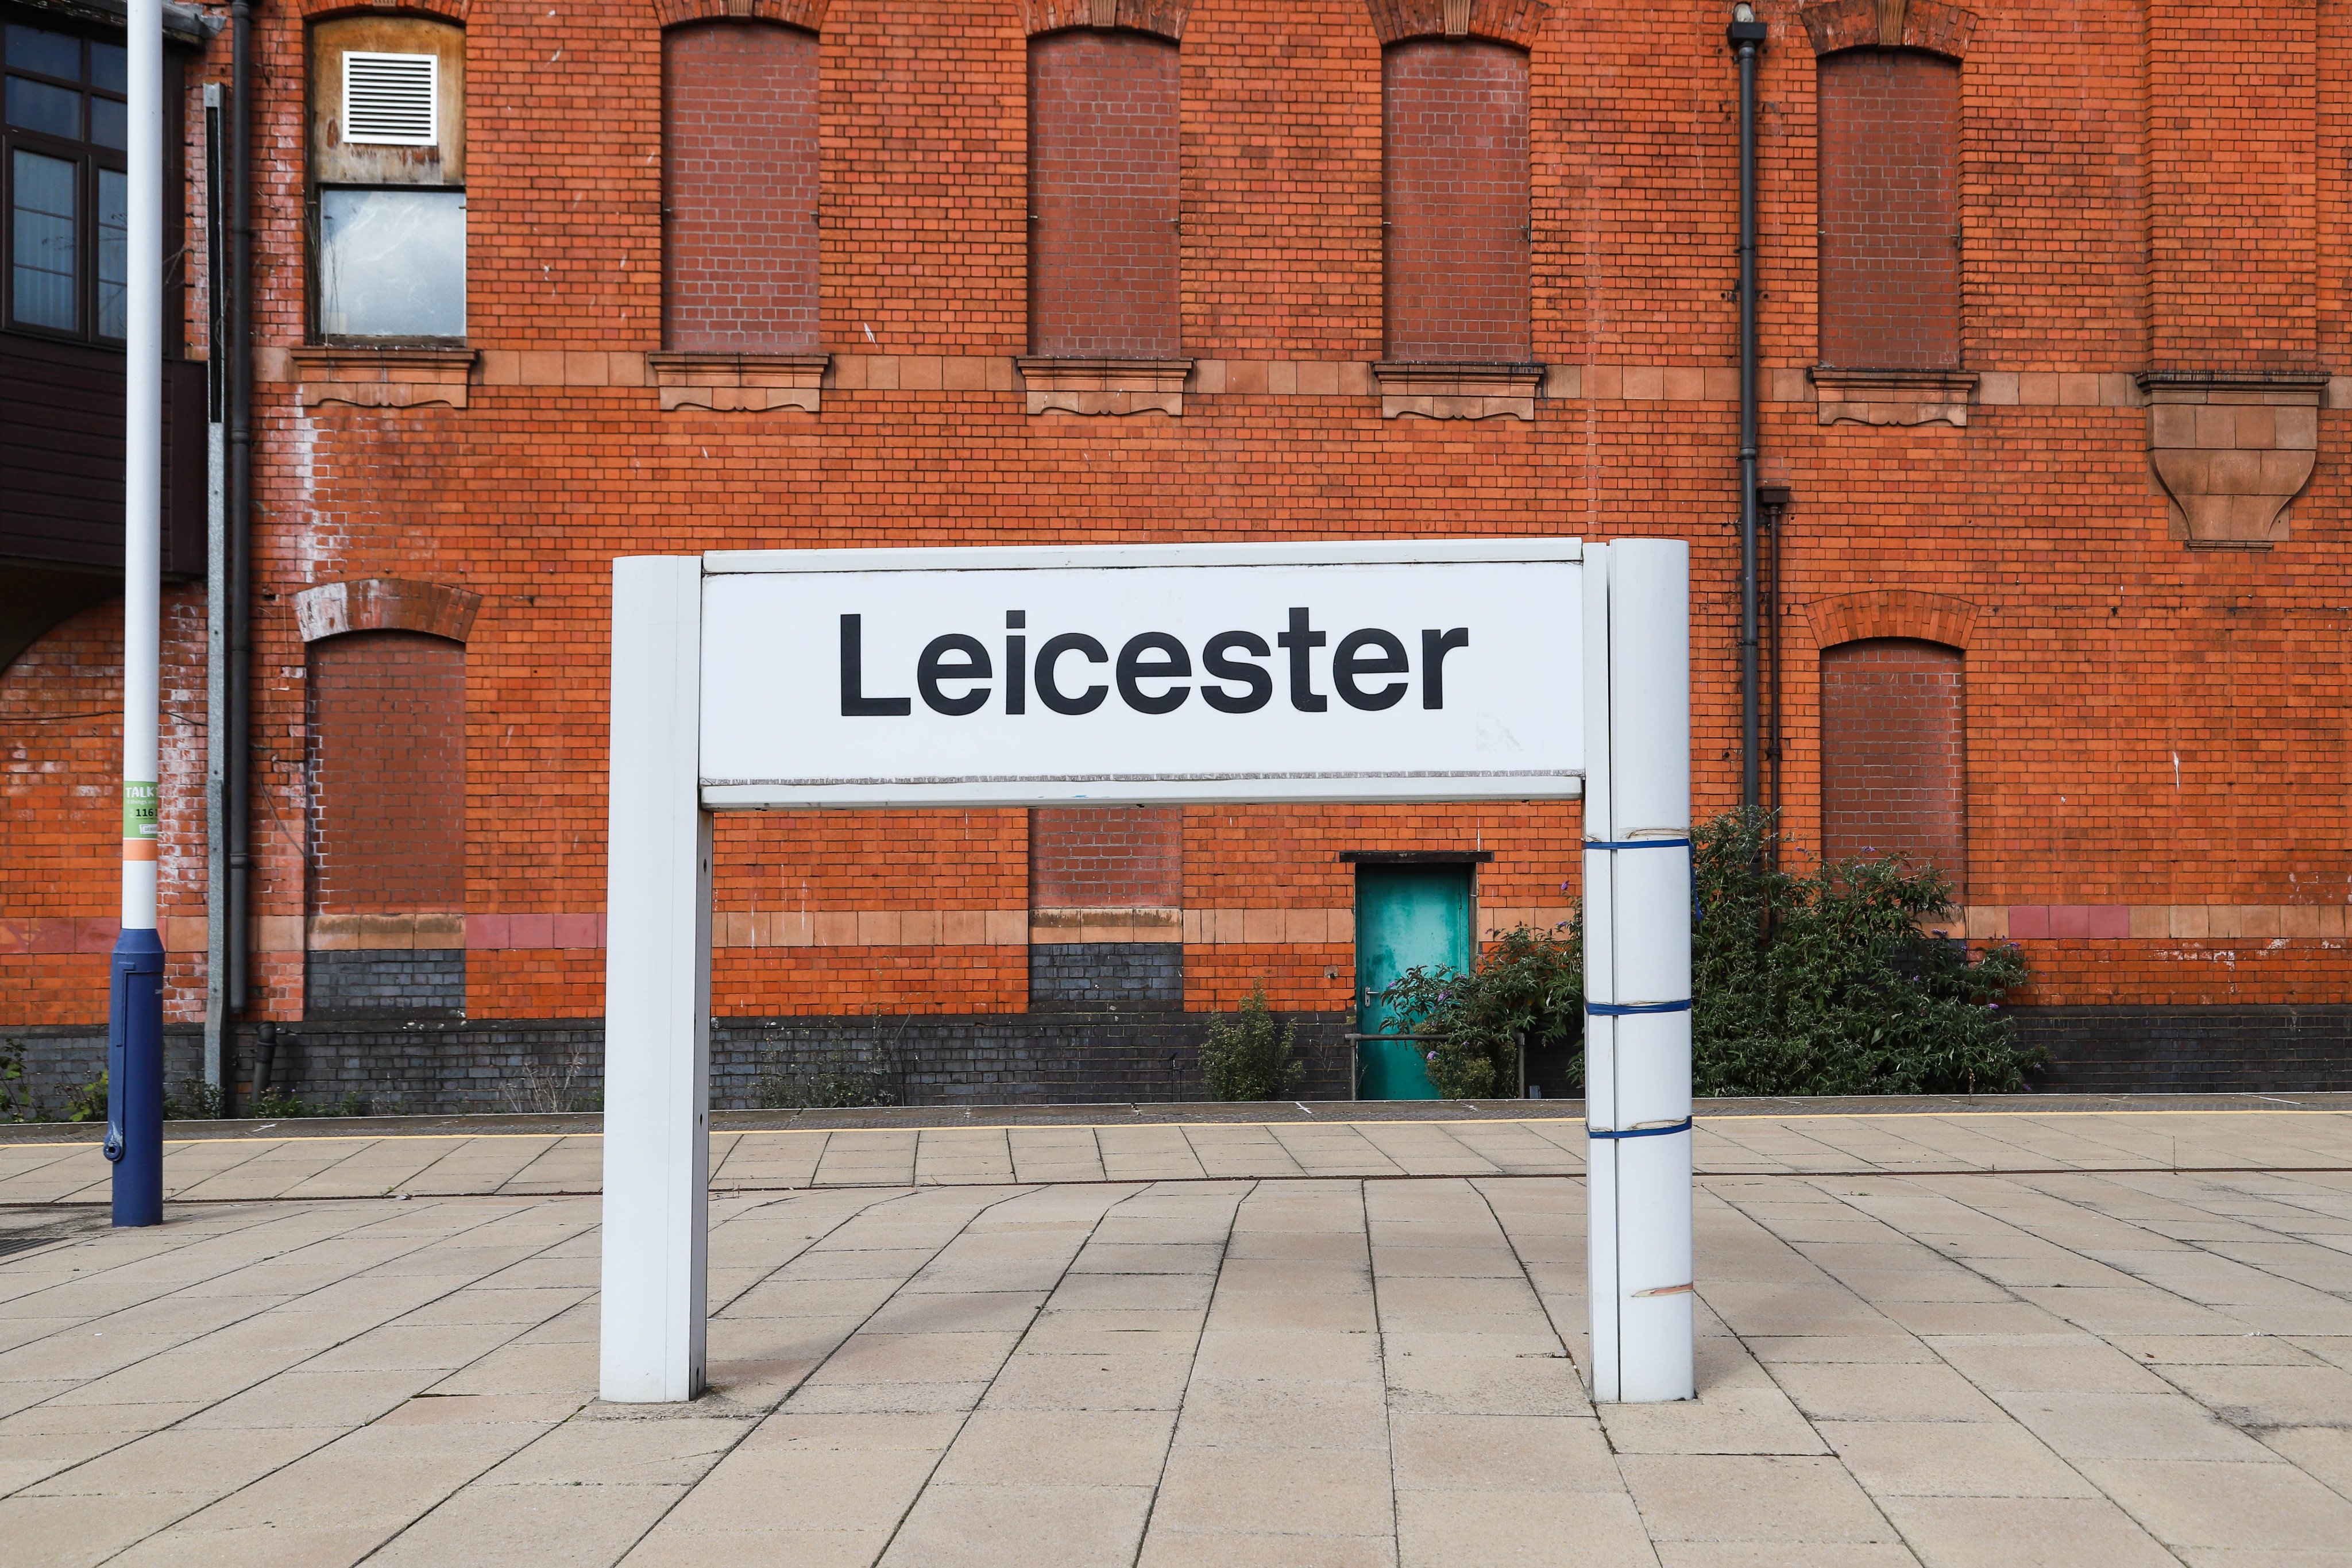 Can you pronounce Leicester properly? Photo: Shutterstock